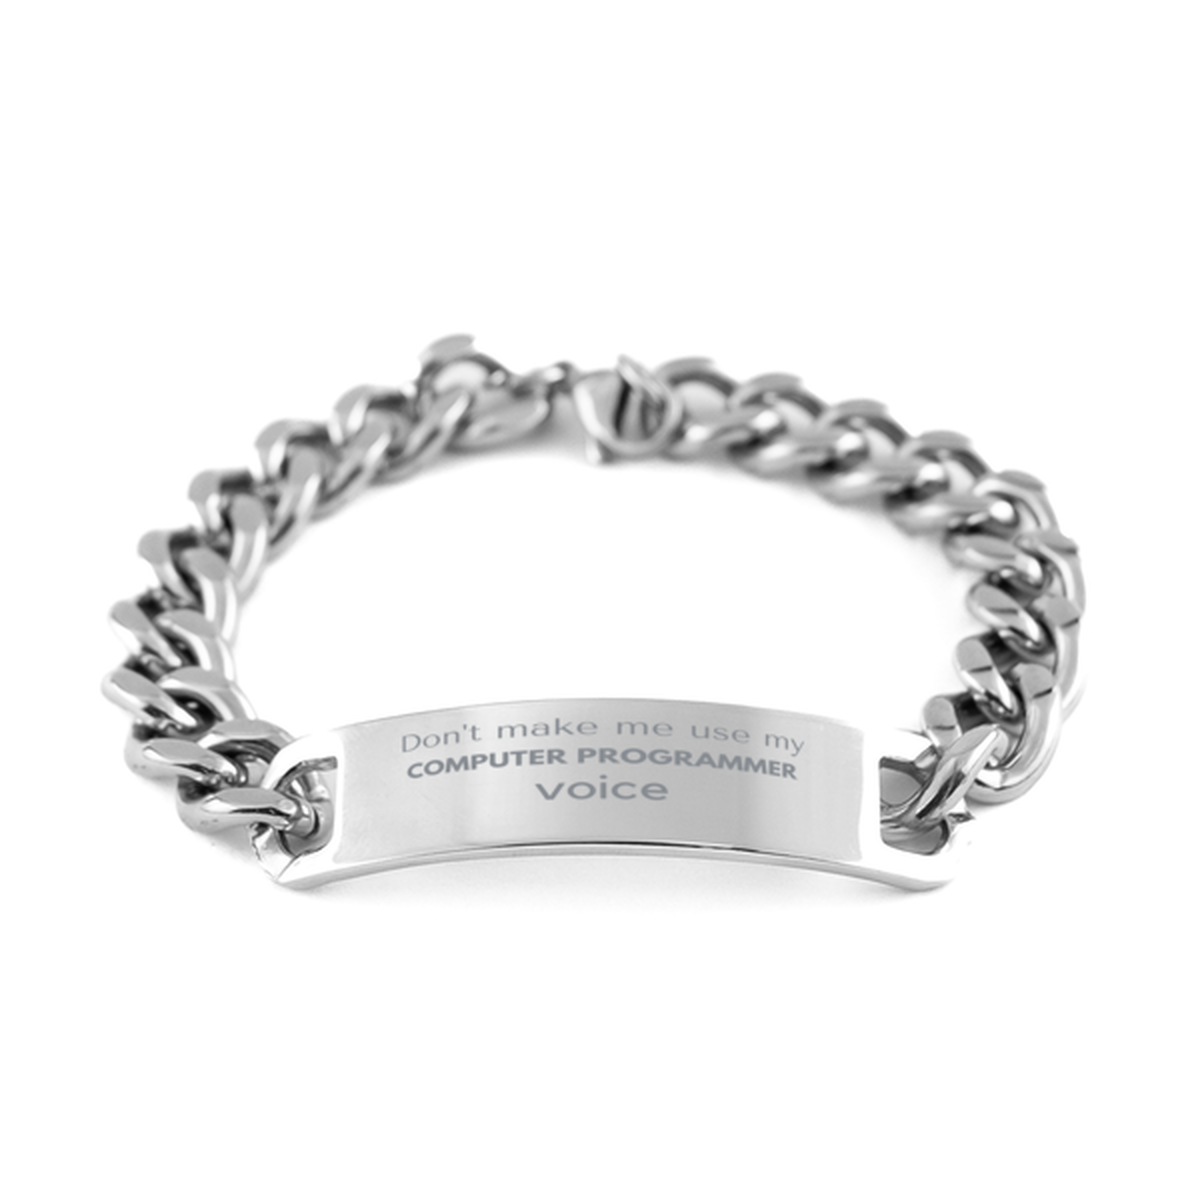 Don't make me use my Computer Programmer voice, Sarcasm Computer Programmer Gifts, Christmas Computer Programmer Cuban Chain Stainless Steel Bracelet Birthday Unique Gifts For Computer Programmer Coworkers, Men, Women, Colleague, Friends